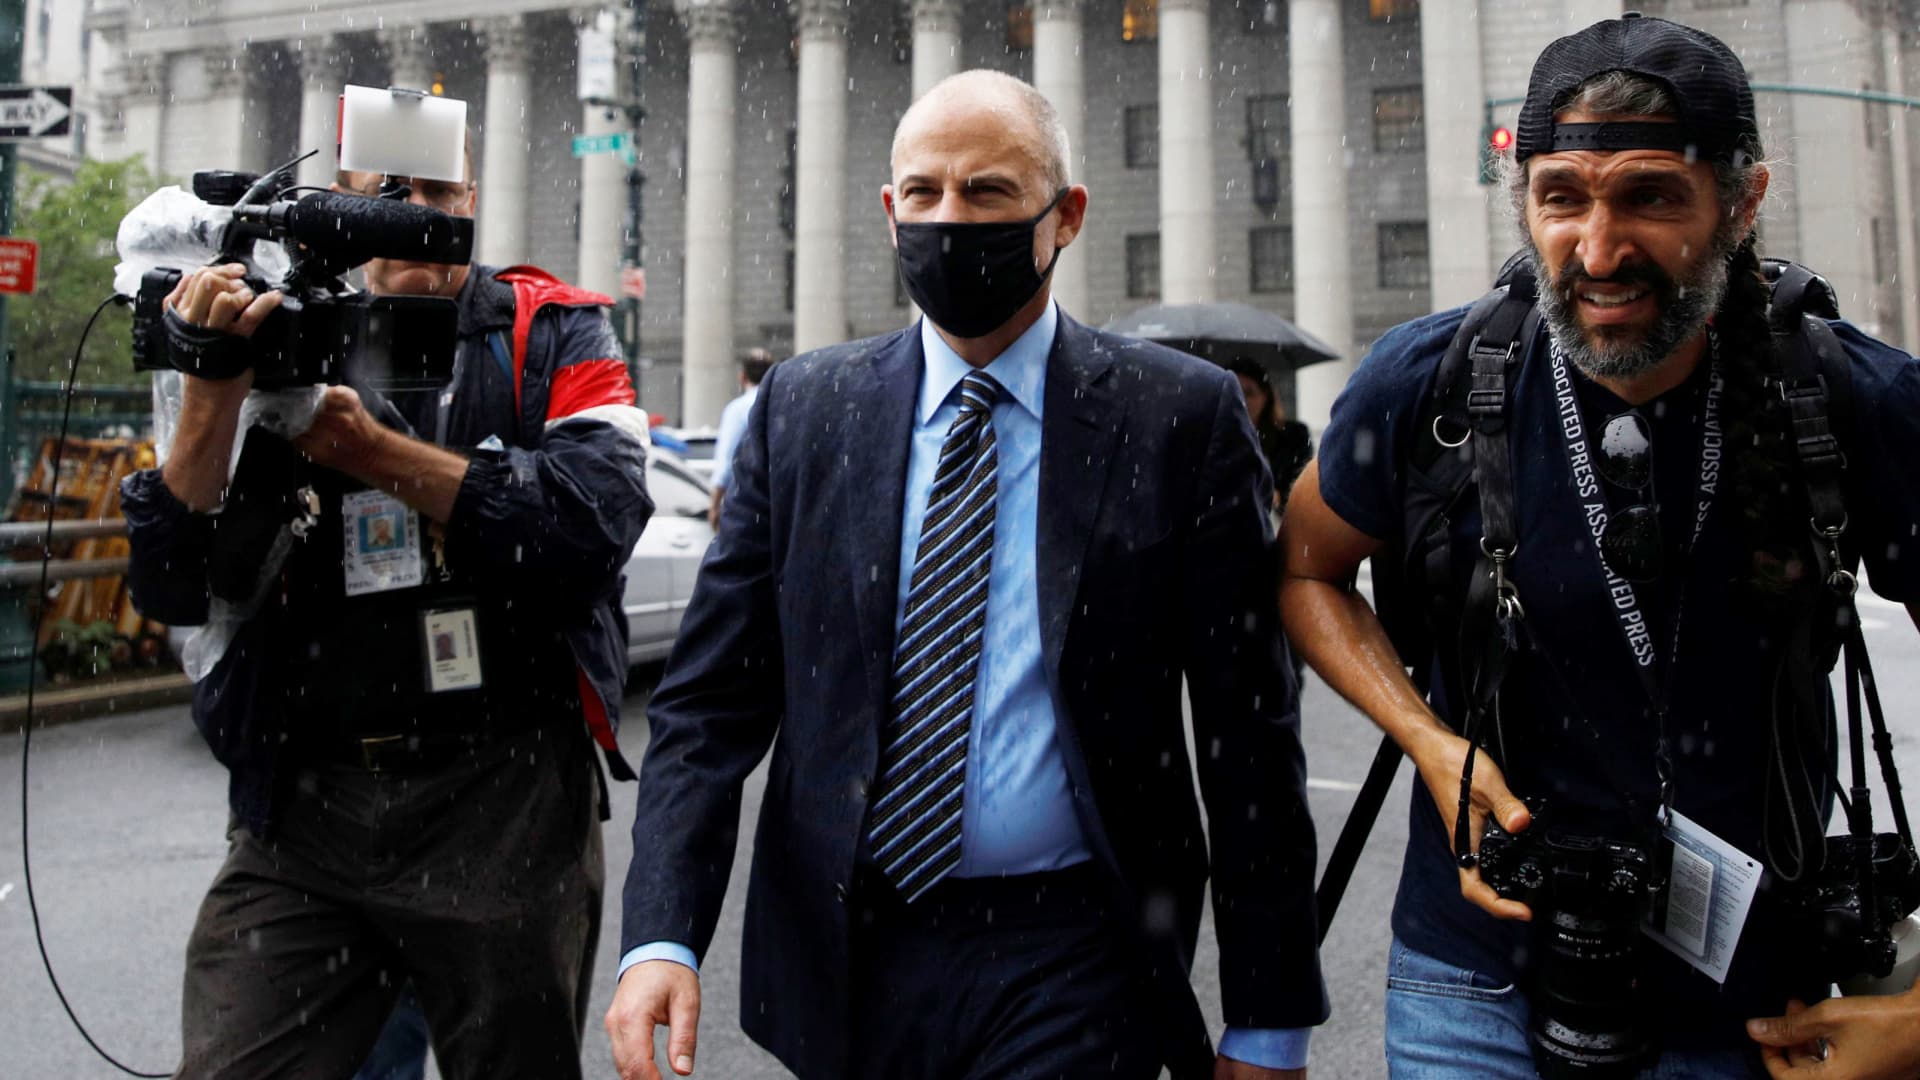 Attorney Michael Avenatti exits, following his sentencing for an extortion scheme against Nike Inc., at the United States Courthouse in New York City, July 8, 2021.